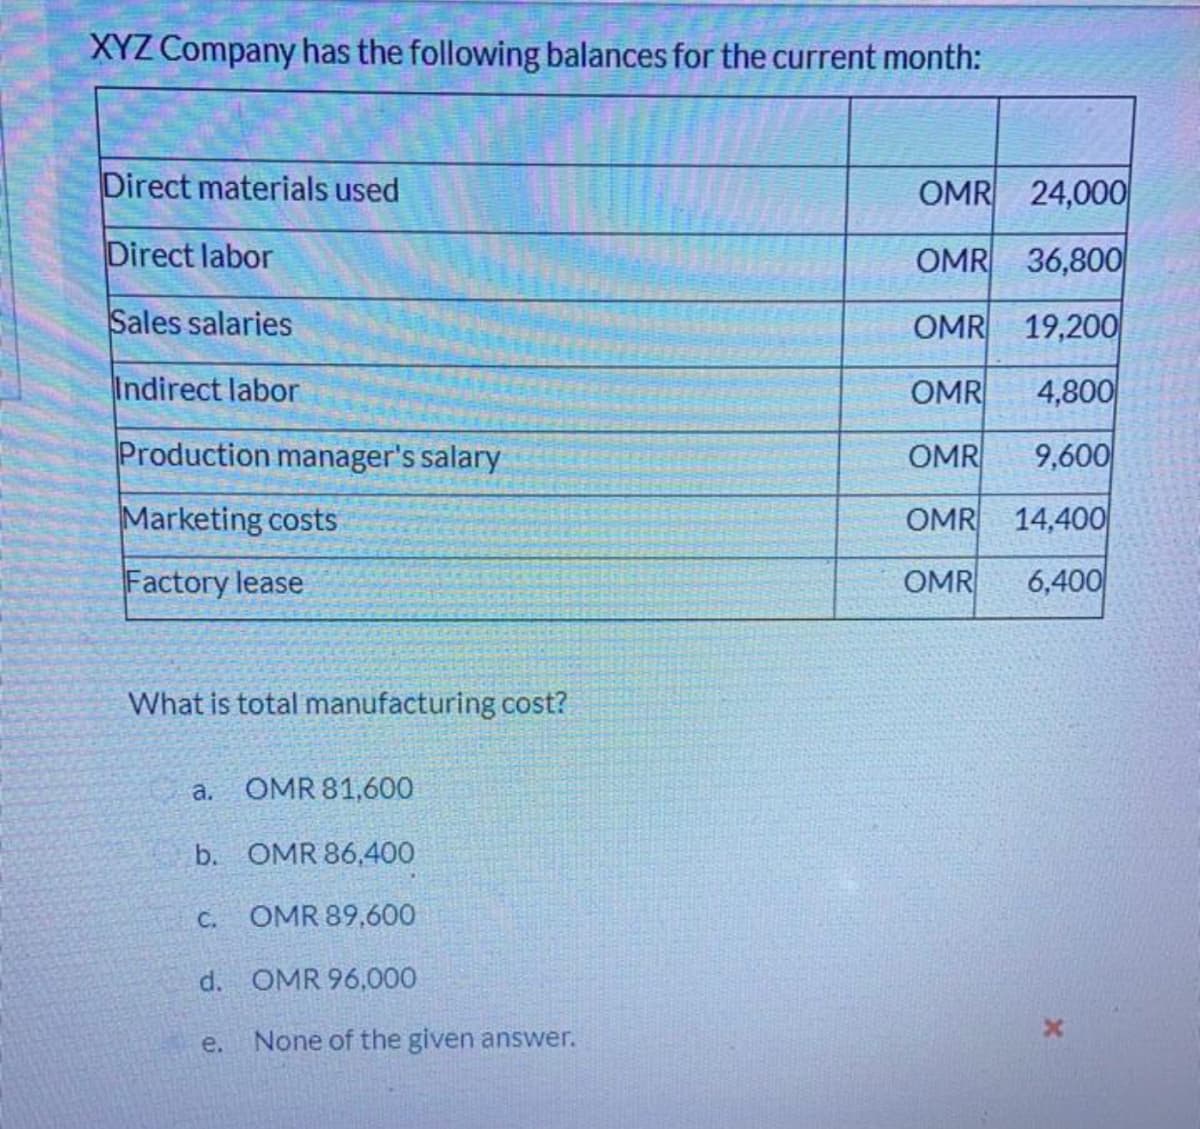 XYZ Company has the following balances for the current month:
Direct materials used
OMR 24,000
Direct labor
OMR 36,800
Sales salaries
OMR
19,200
Indirect labor
OMR
4,800
Production manager's salary
OMR
9,600
Marketing costs
OMR 14,400
Factory lease
OMR
6,400
What is total manufacturing cost?
a.
OMR 81,600
b. OMR 86,400
C.
OMR 89,600
d. OMR 96,000
e.
None of the given answer.
